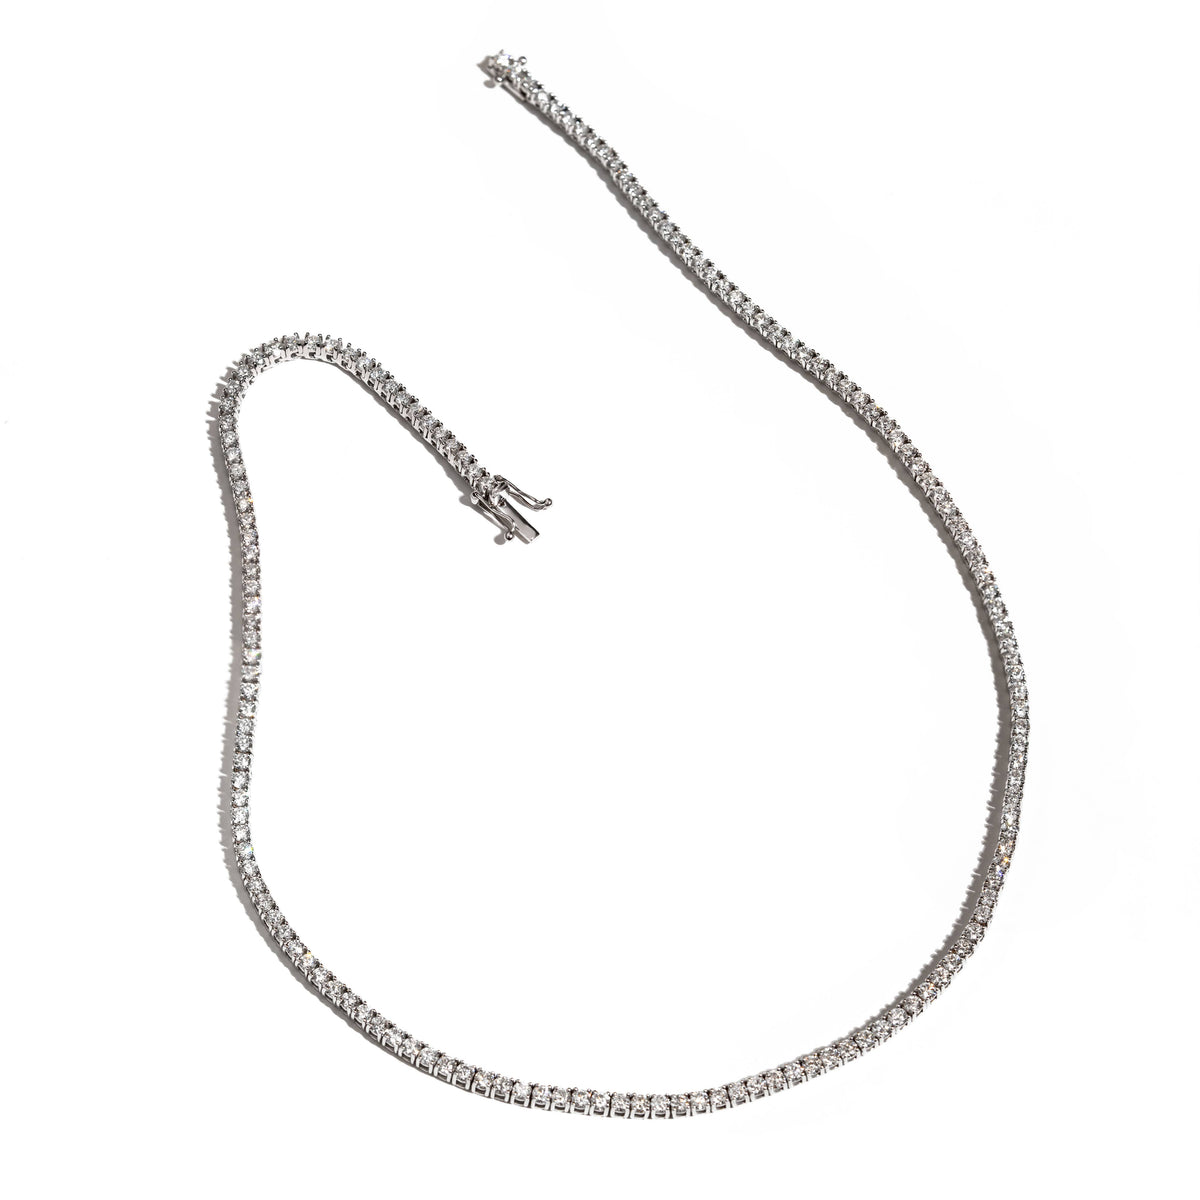 Tennis necklace with diamonds 2.90ct in 18K gold